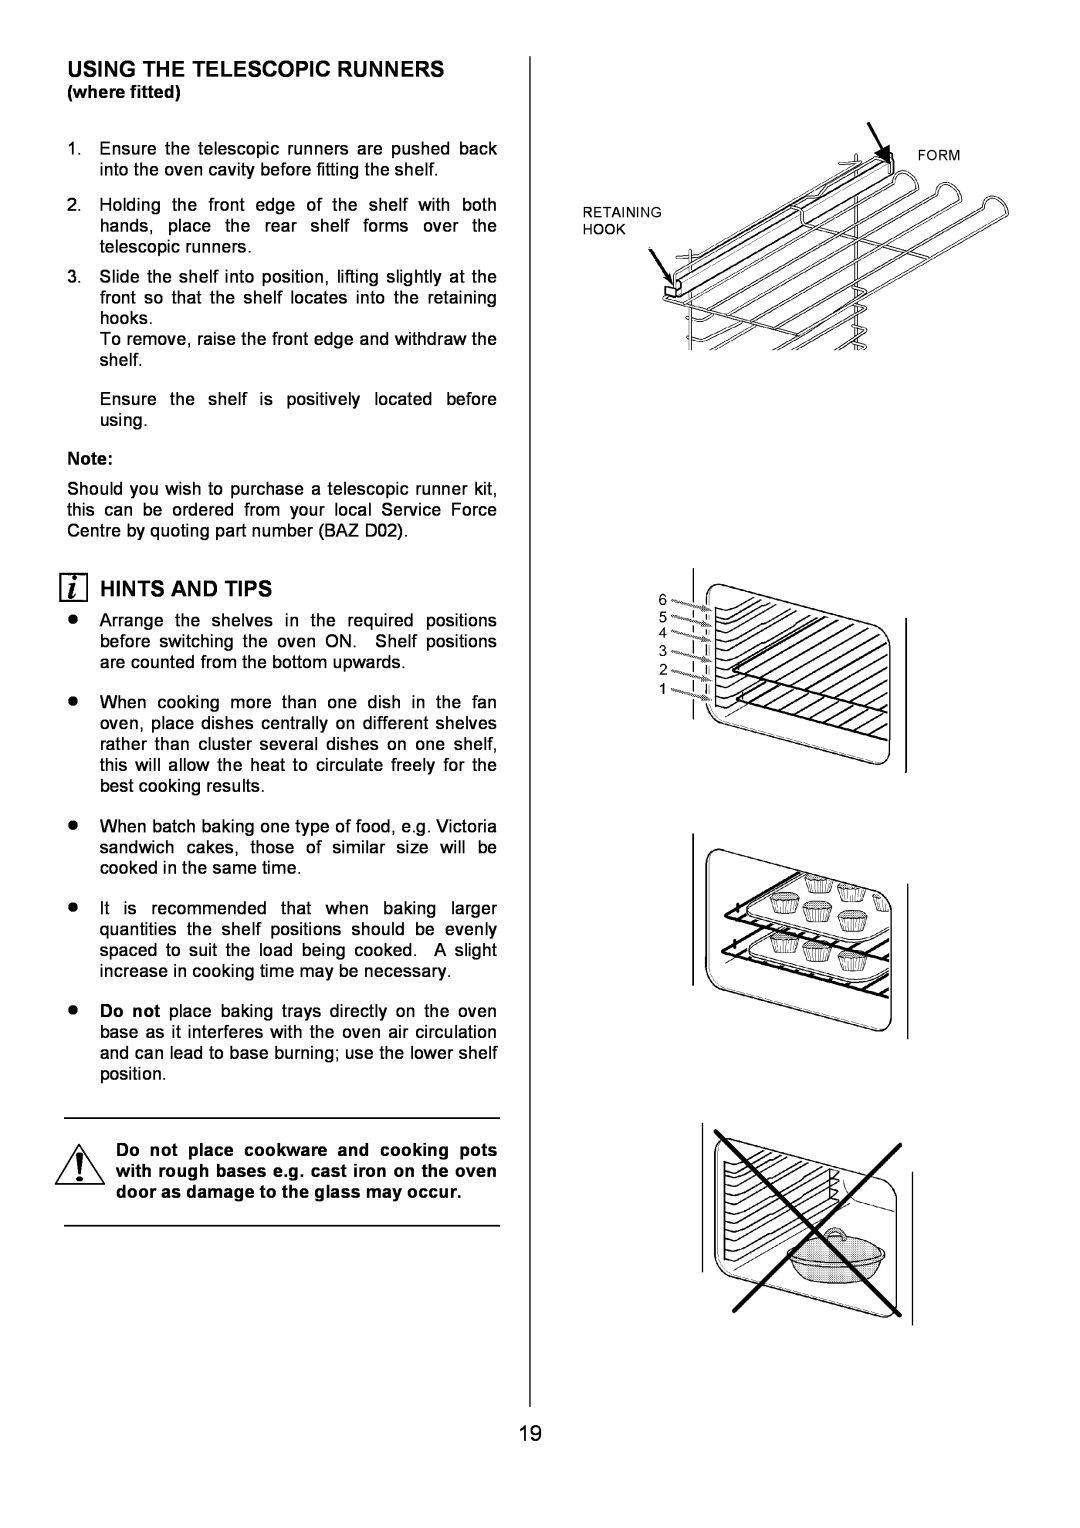 Electrolux D4101-4 operating instructions Using The Telescopic Runners, Hints And Tips, where fitted 